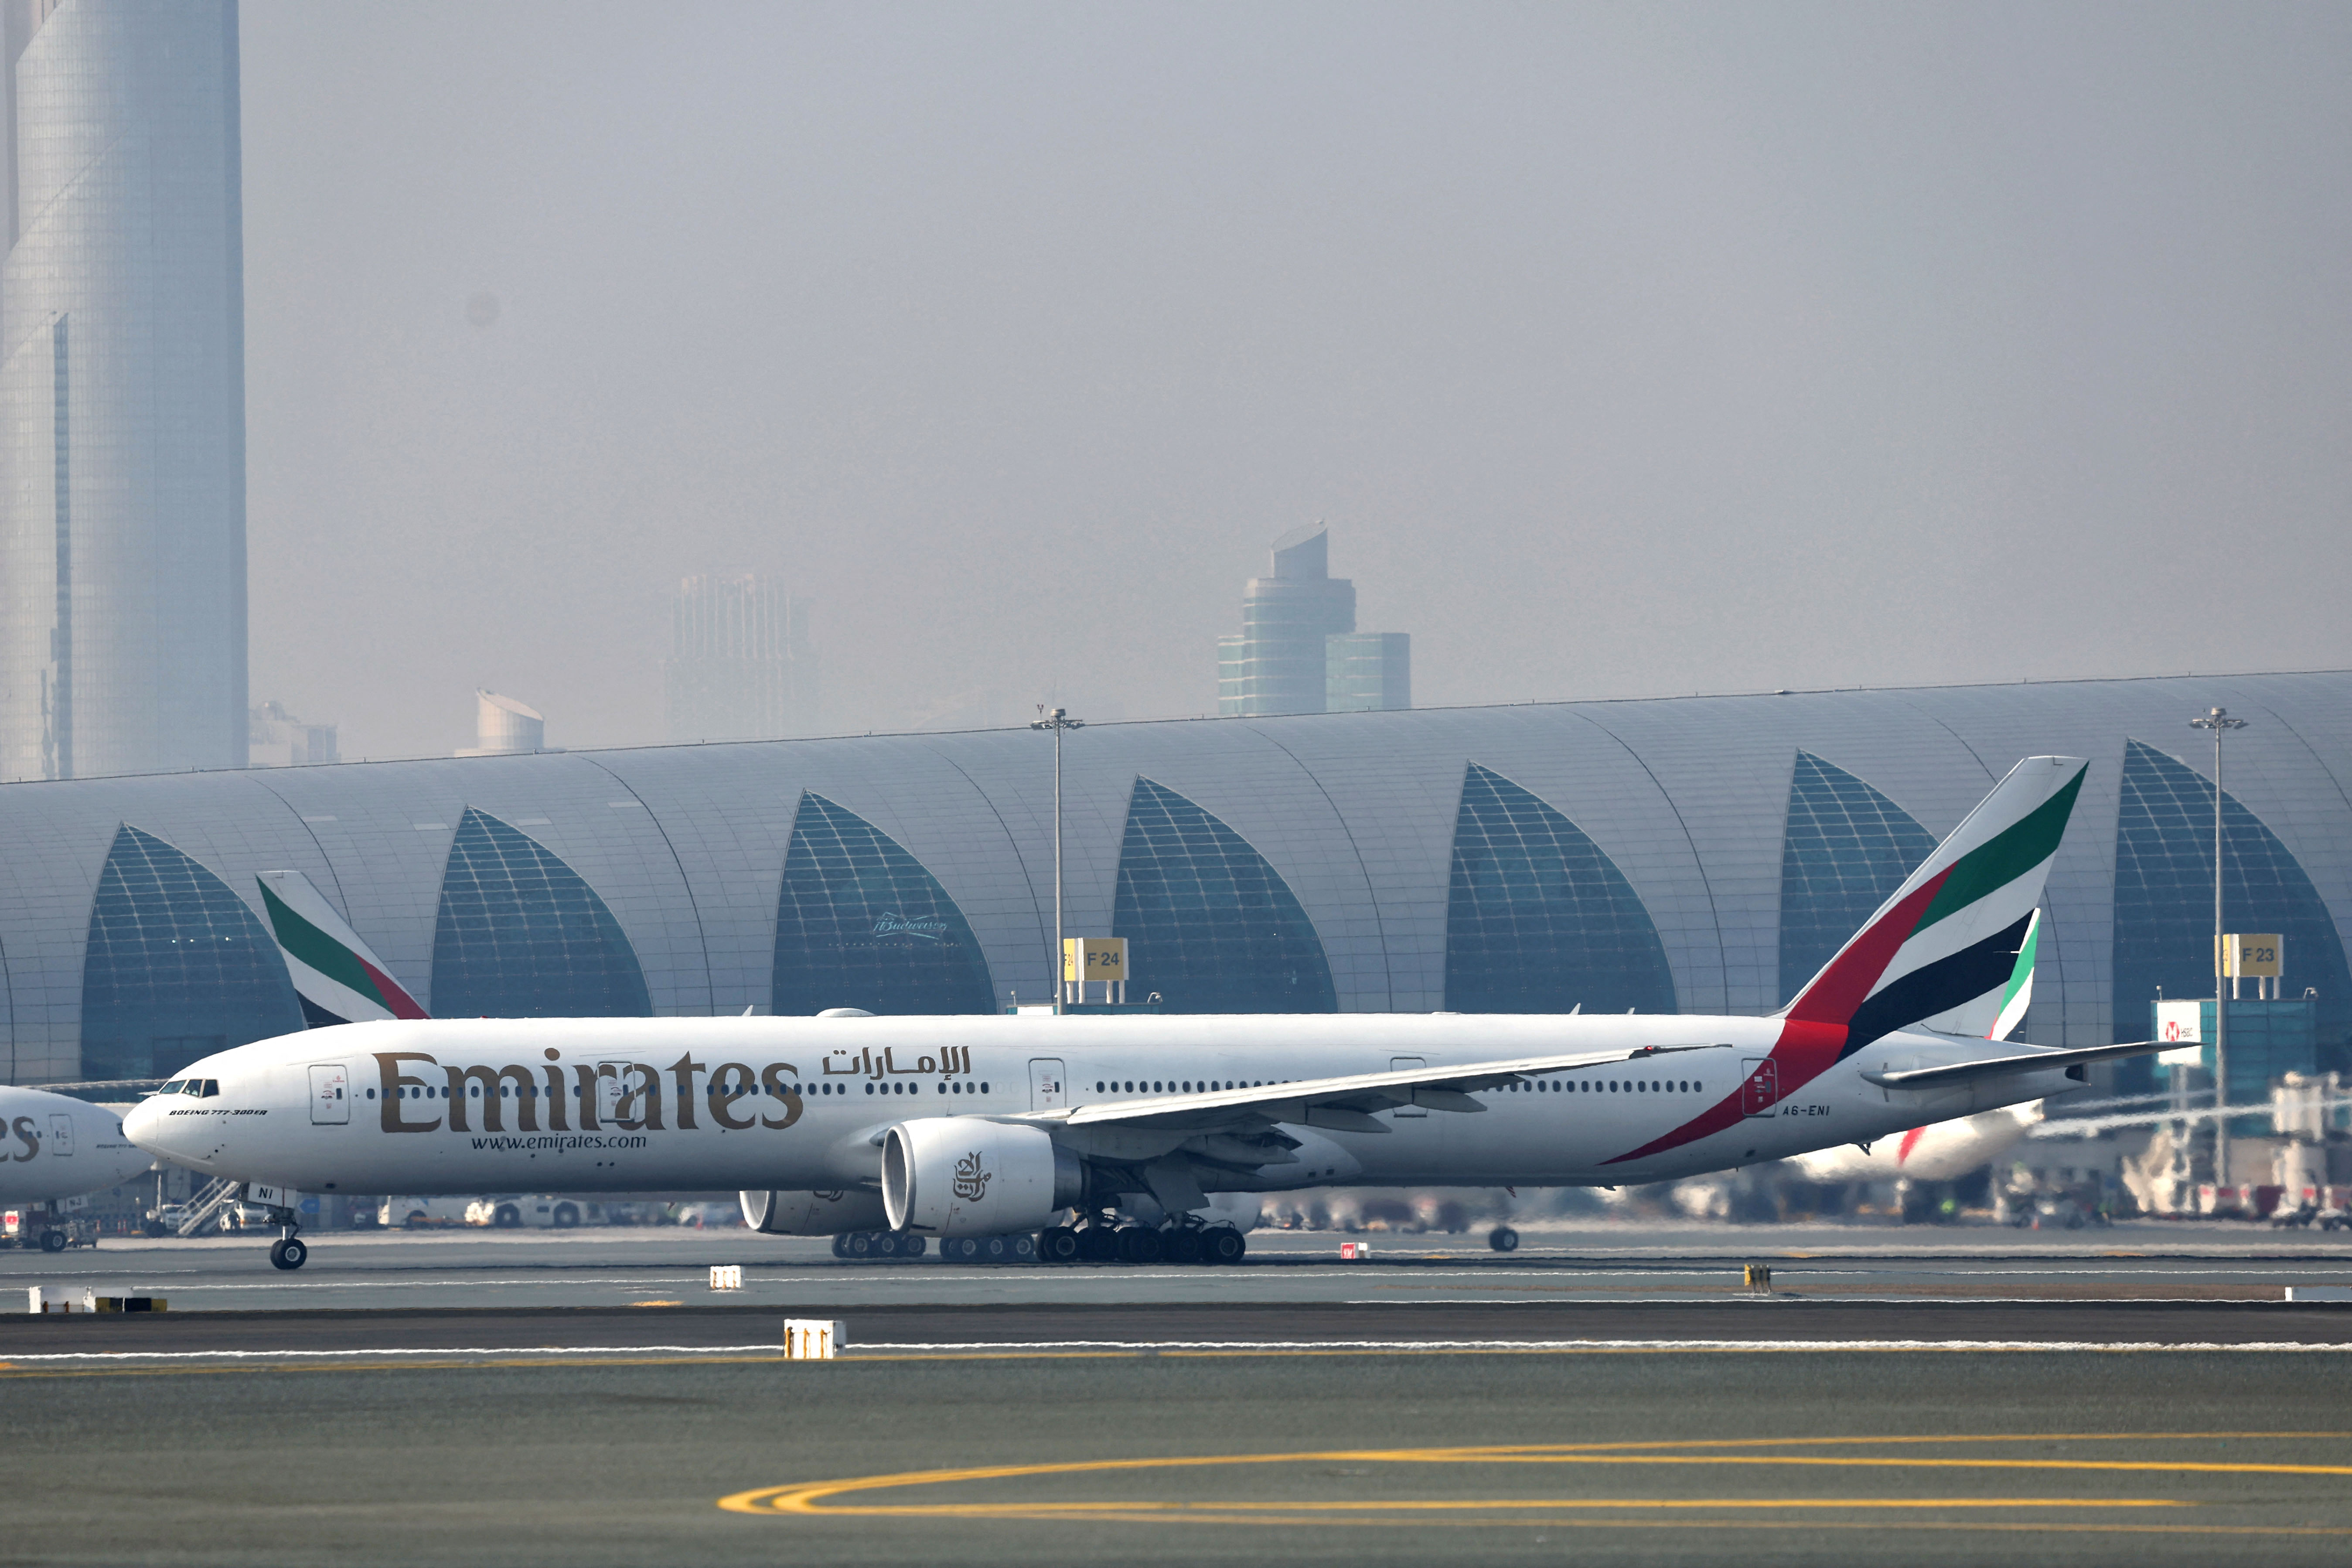 Planes on the tarmac of Dubai International Airport in Dubai, on January 30, 2023 | Source: Getty Images